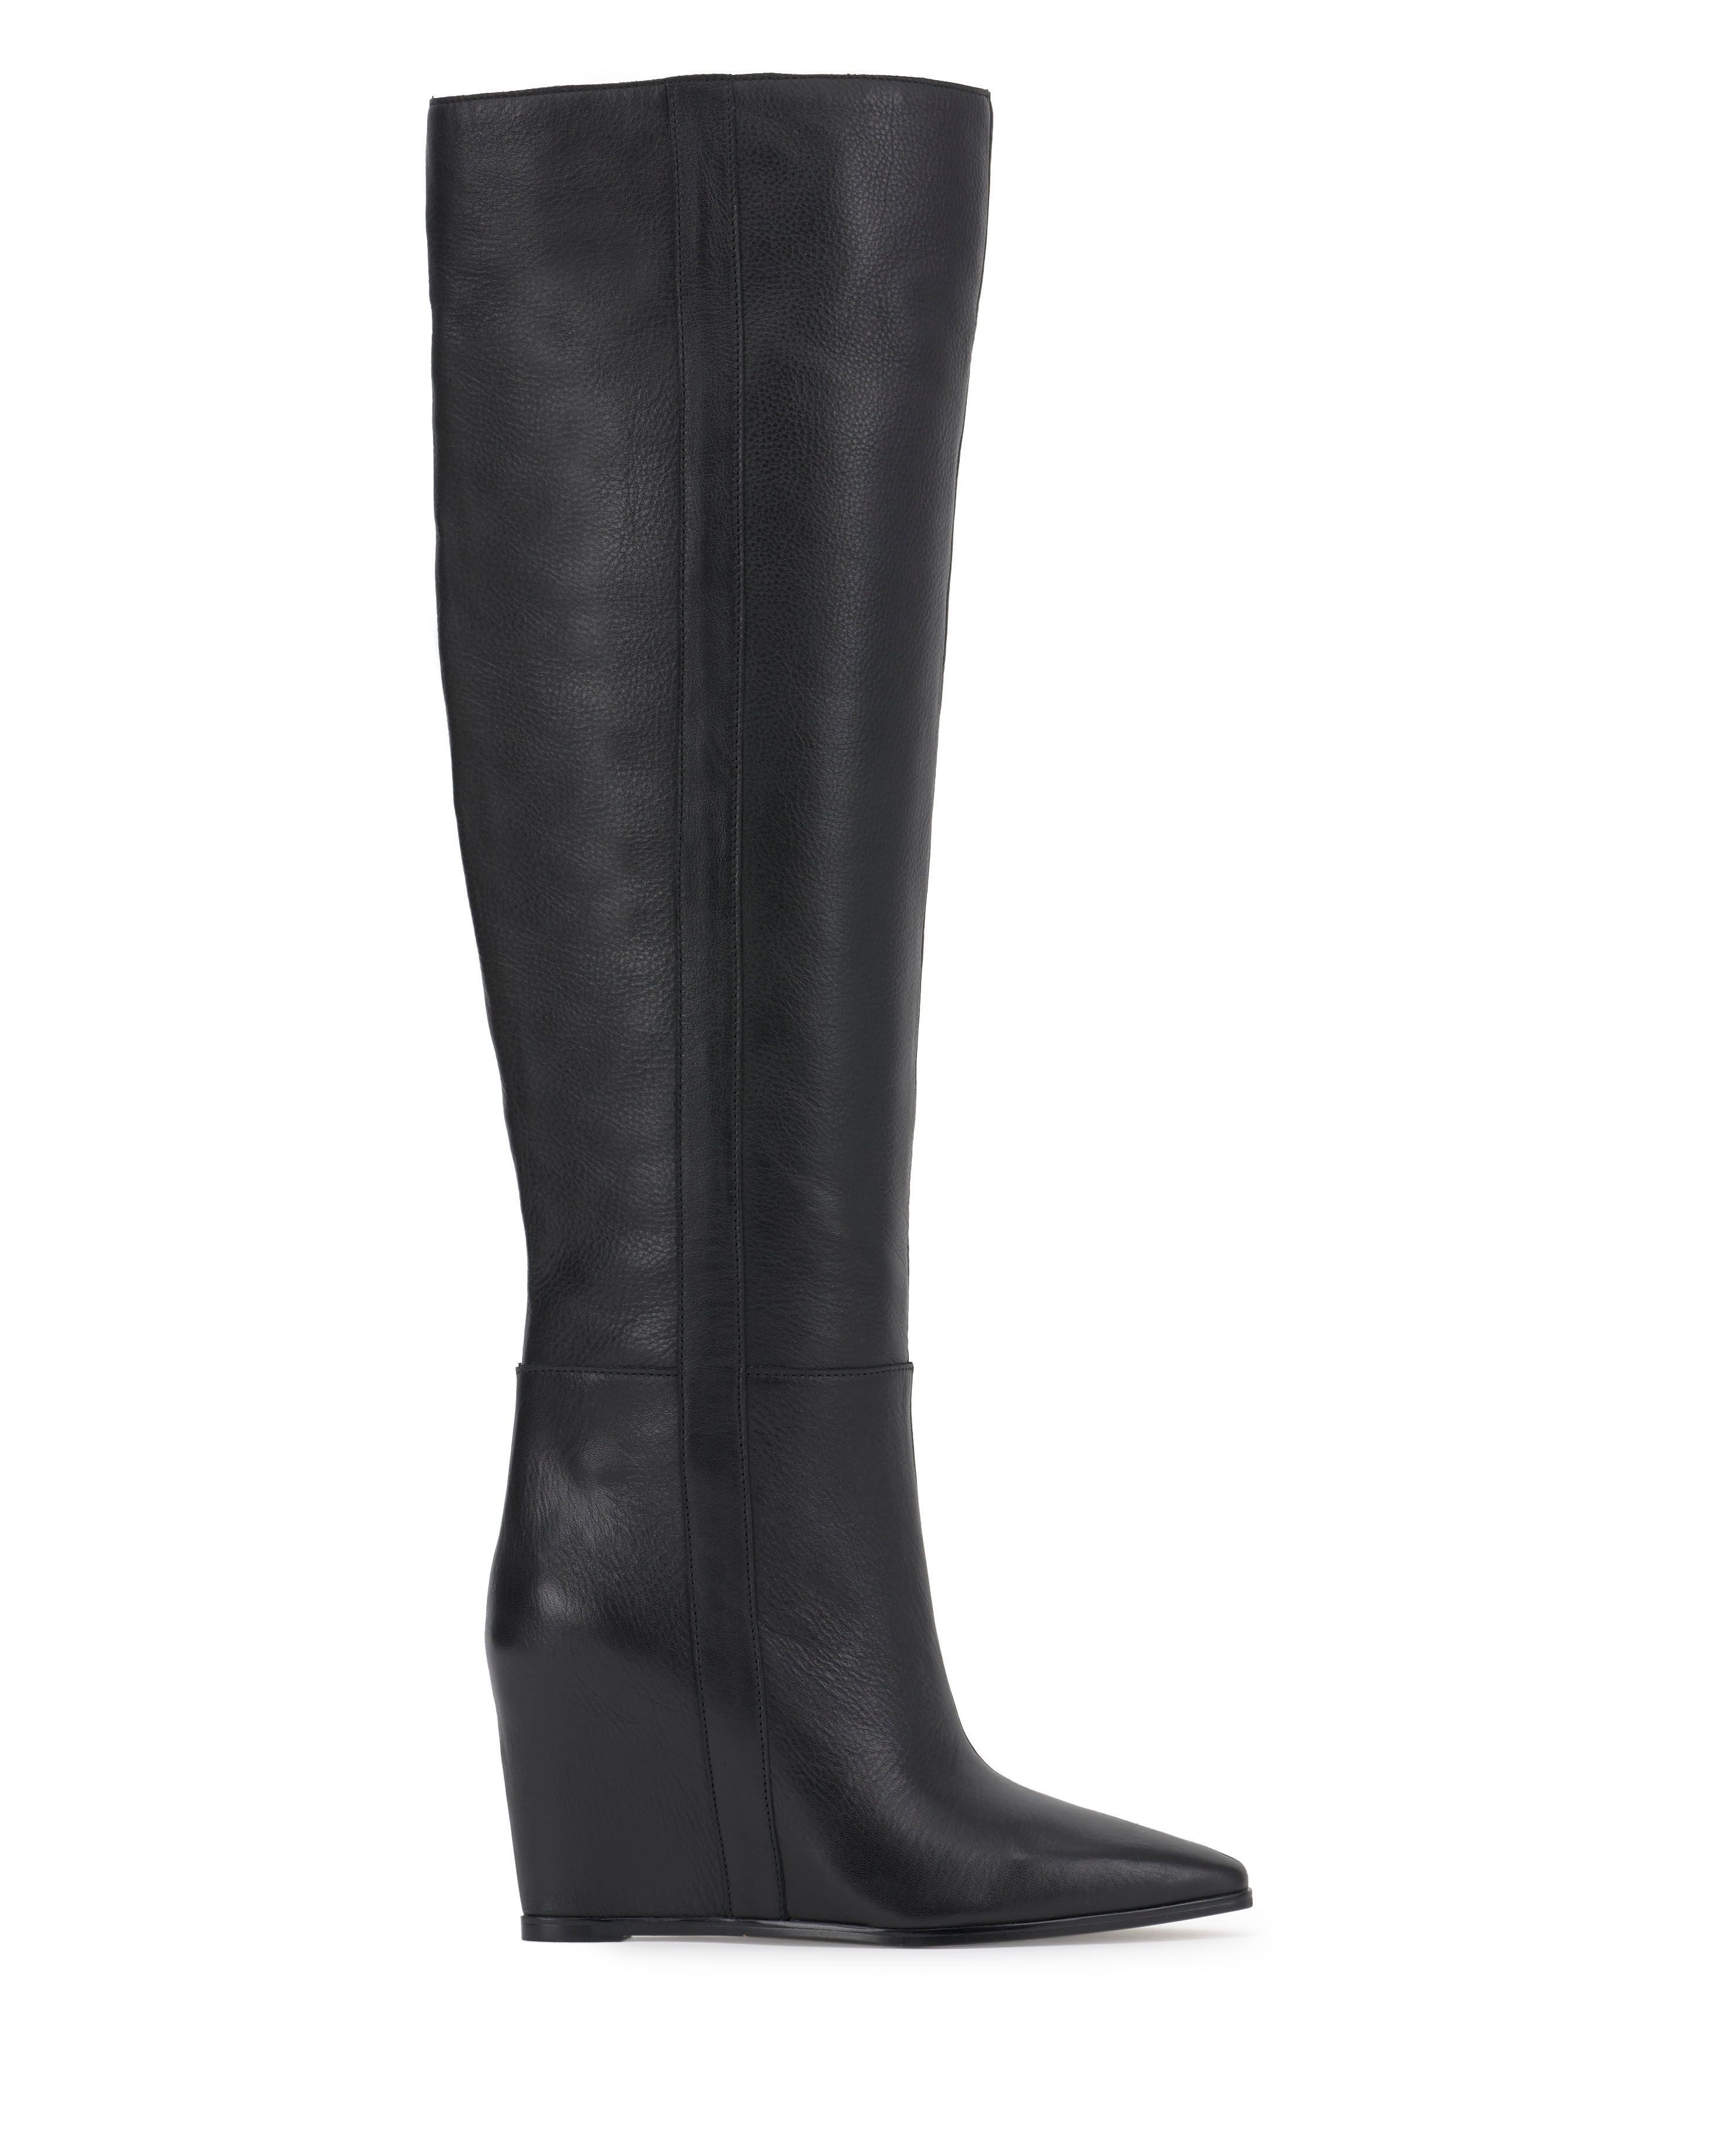 Vince Camuto Tiasie Wide-calf Boot